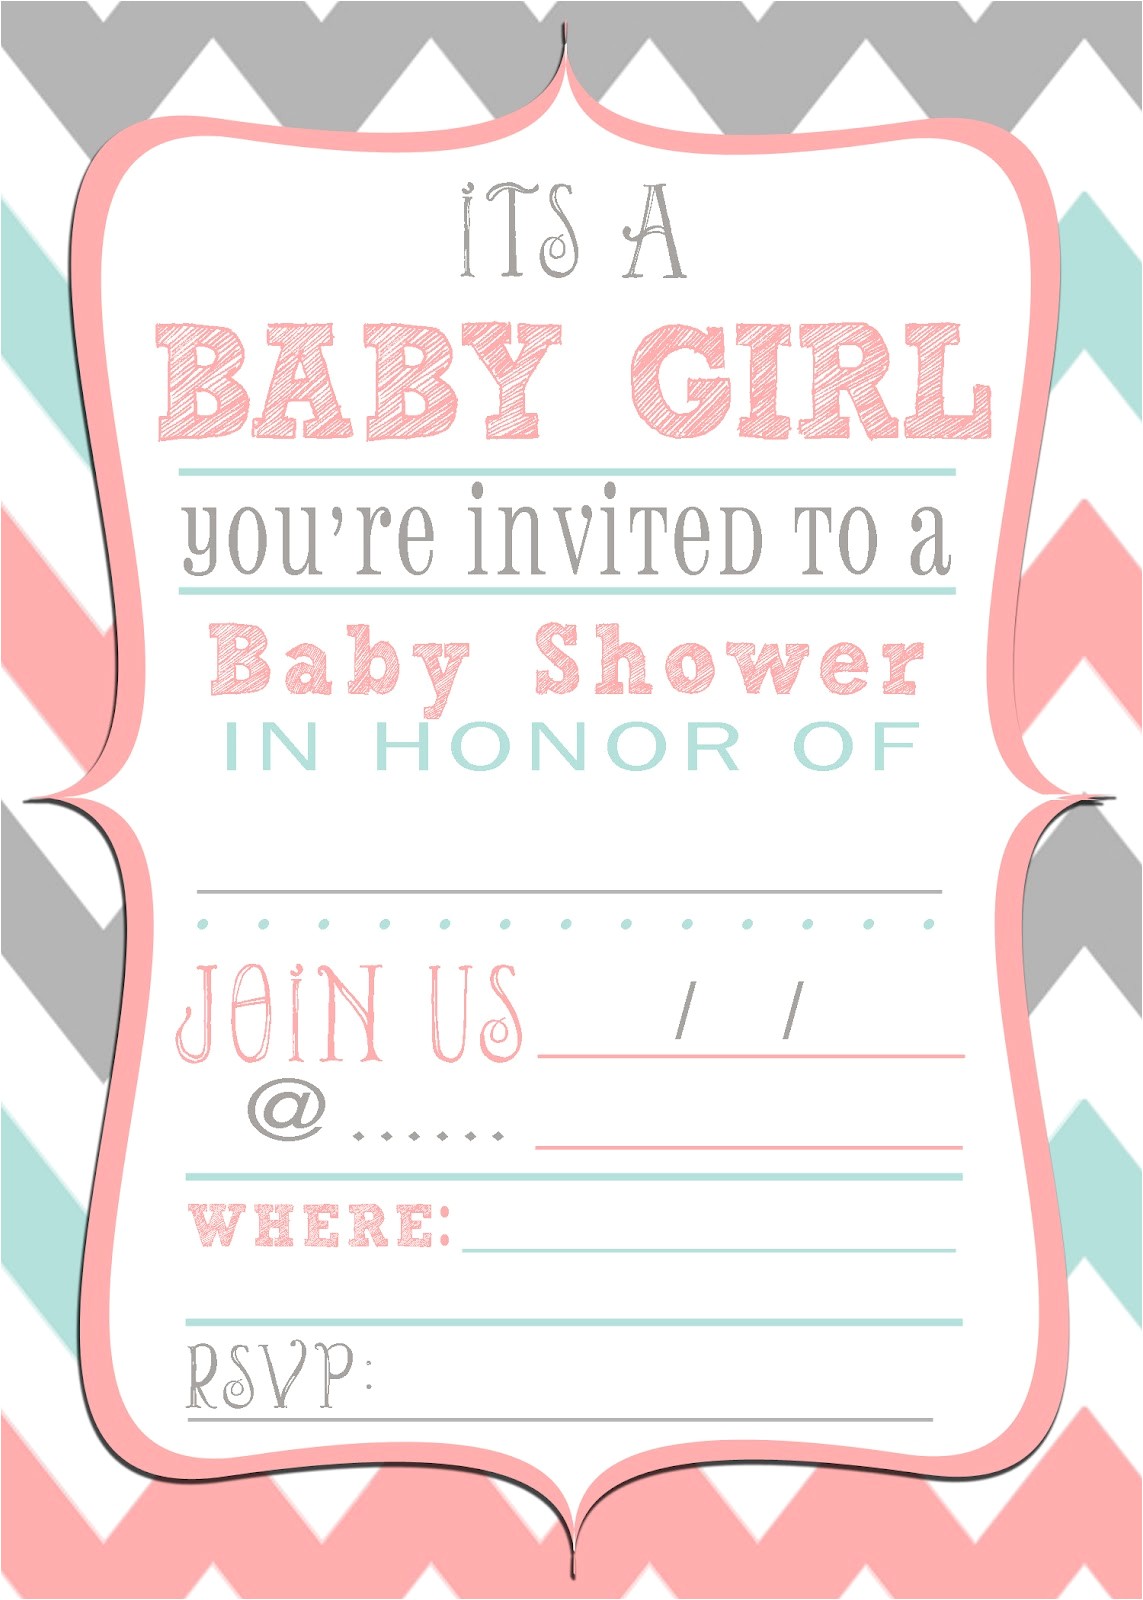 Printable Baby Girl Shower Invitations Mrs This and that Baby Shower Banner Free Downloads